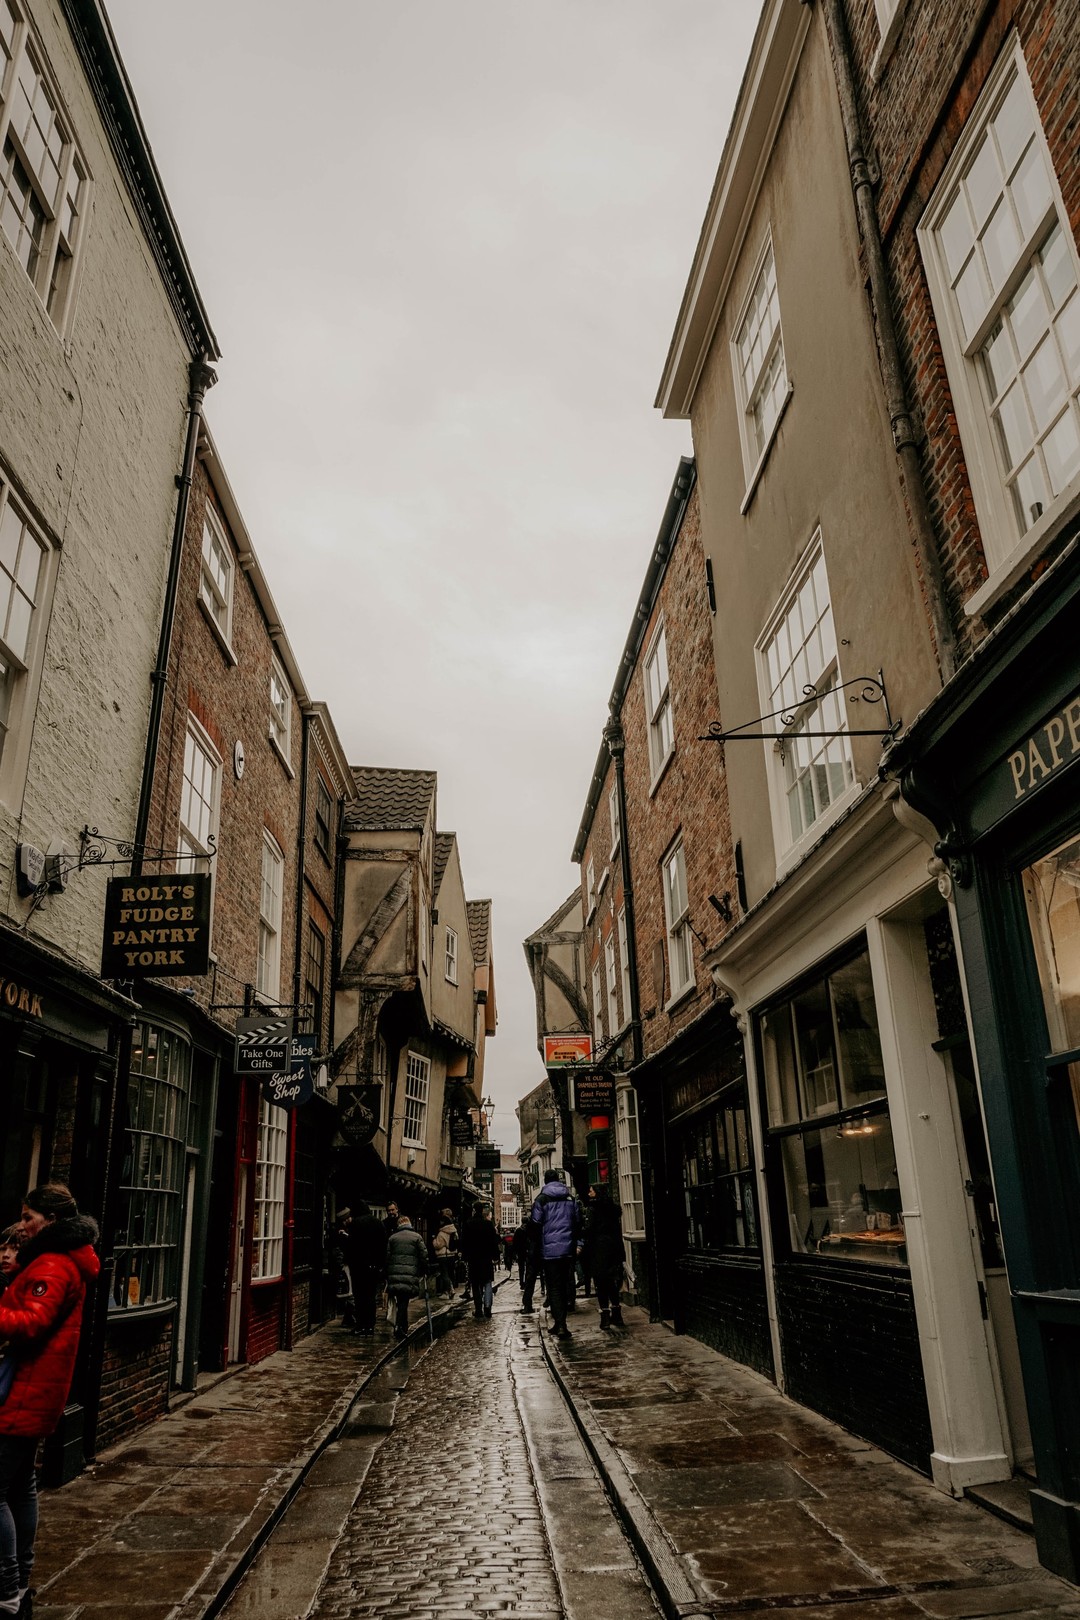 York, UK: One of the best romantic getaways for couples who love culture.